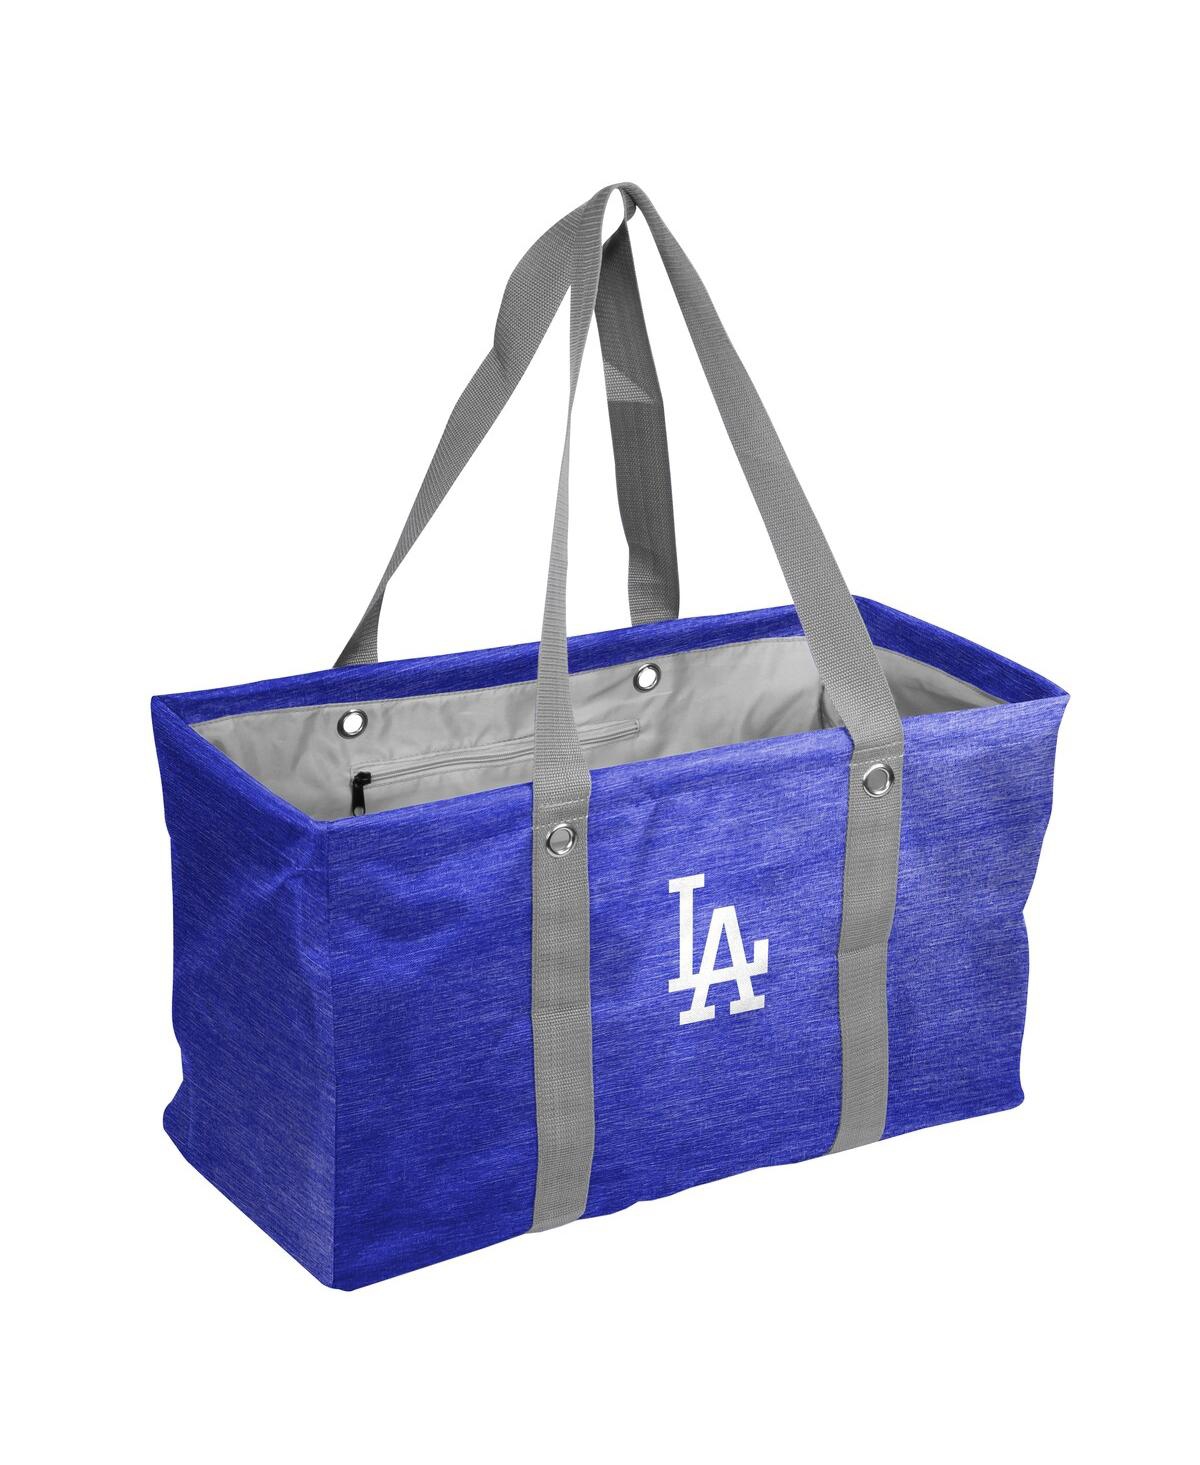 Men's and Women's Los Angeles Dodgers Crosshatch Picnic Caddy Tote Bag - Blue